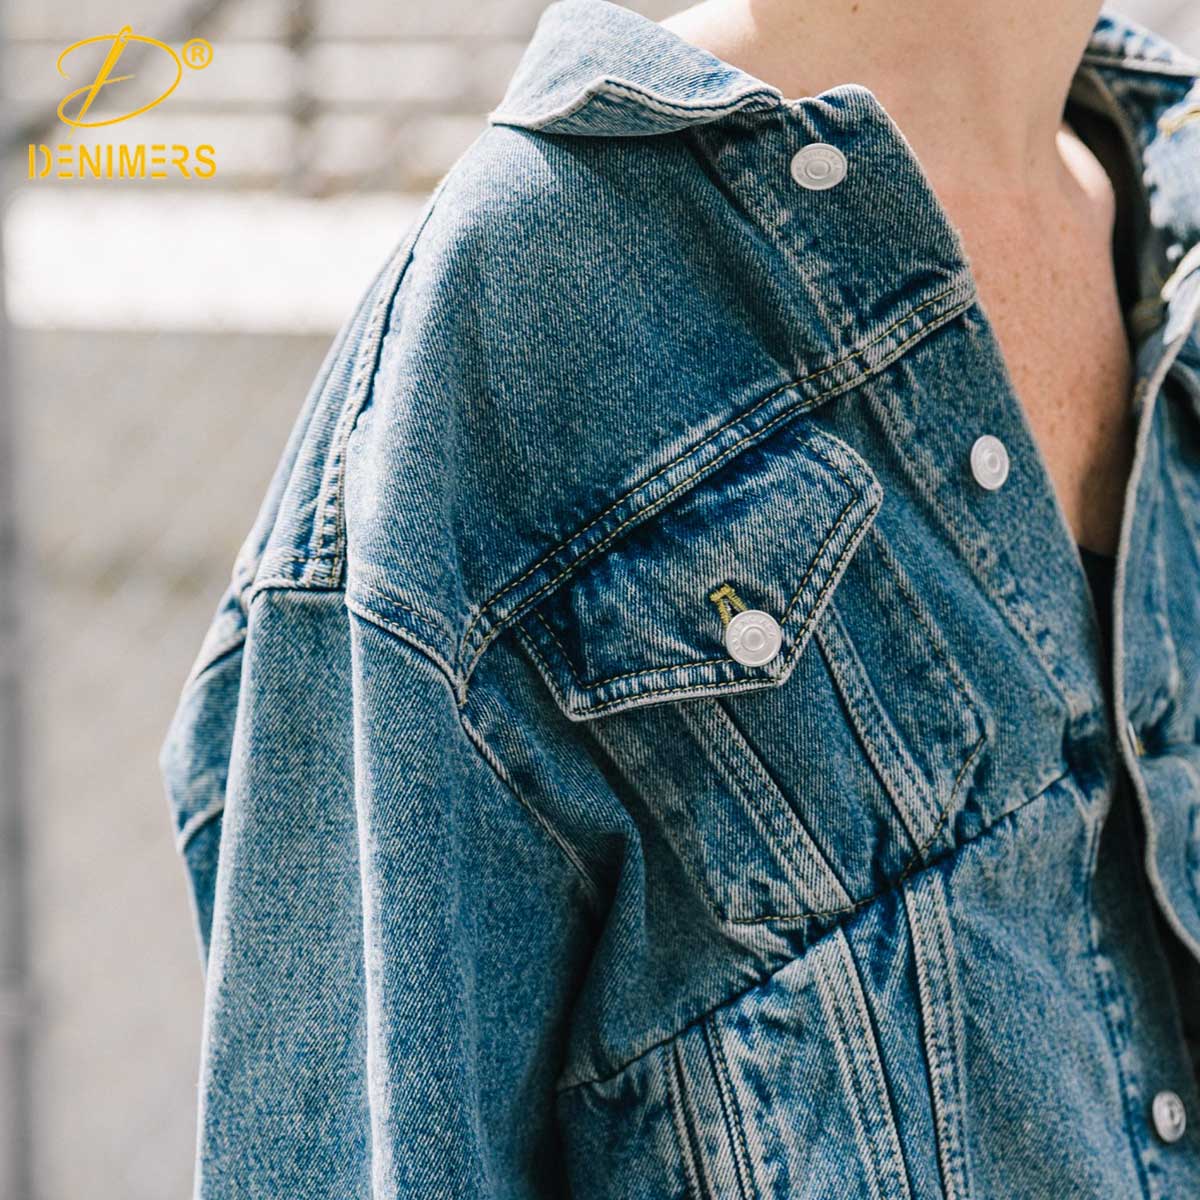 How to Style Denim Jeans and Jacket in 7 Different Ways